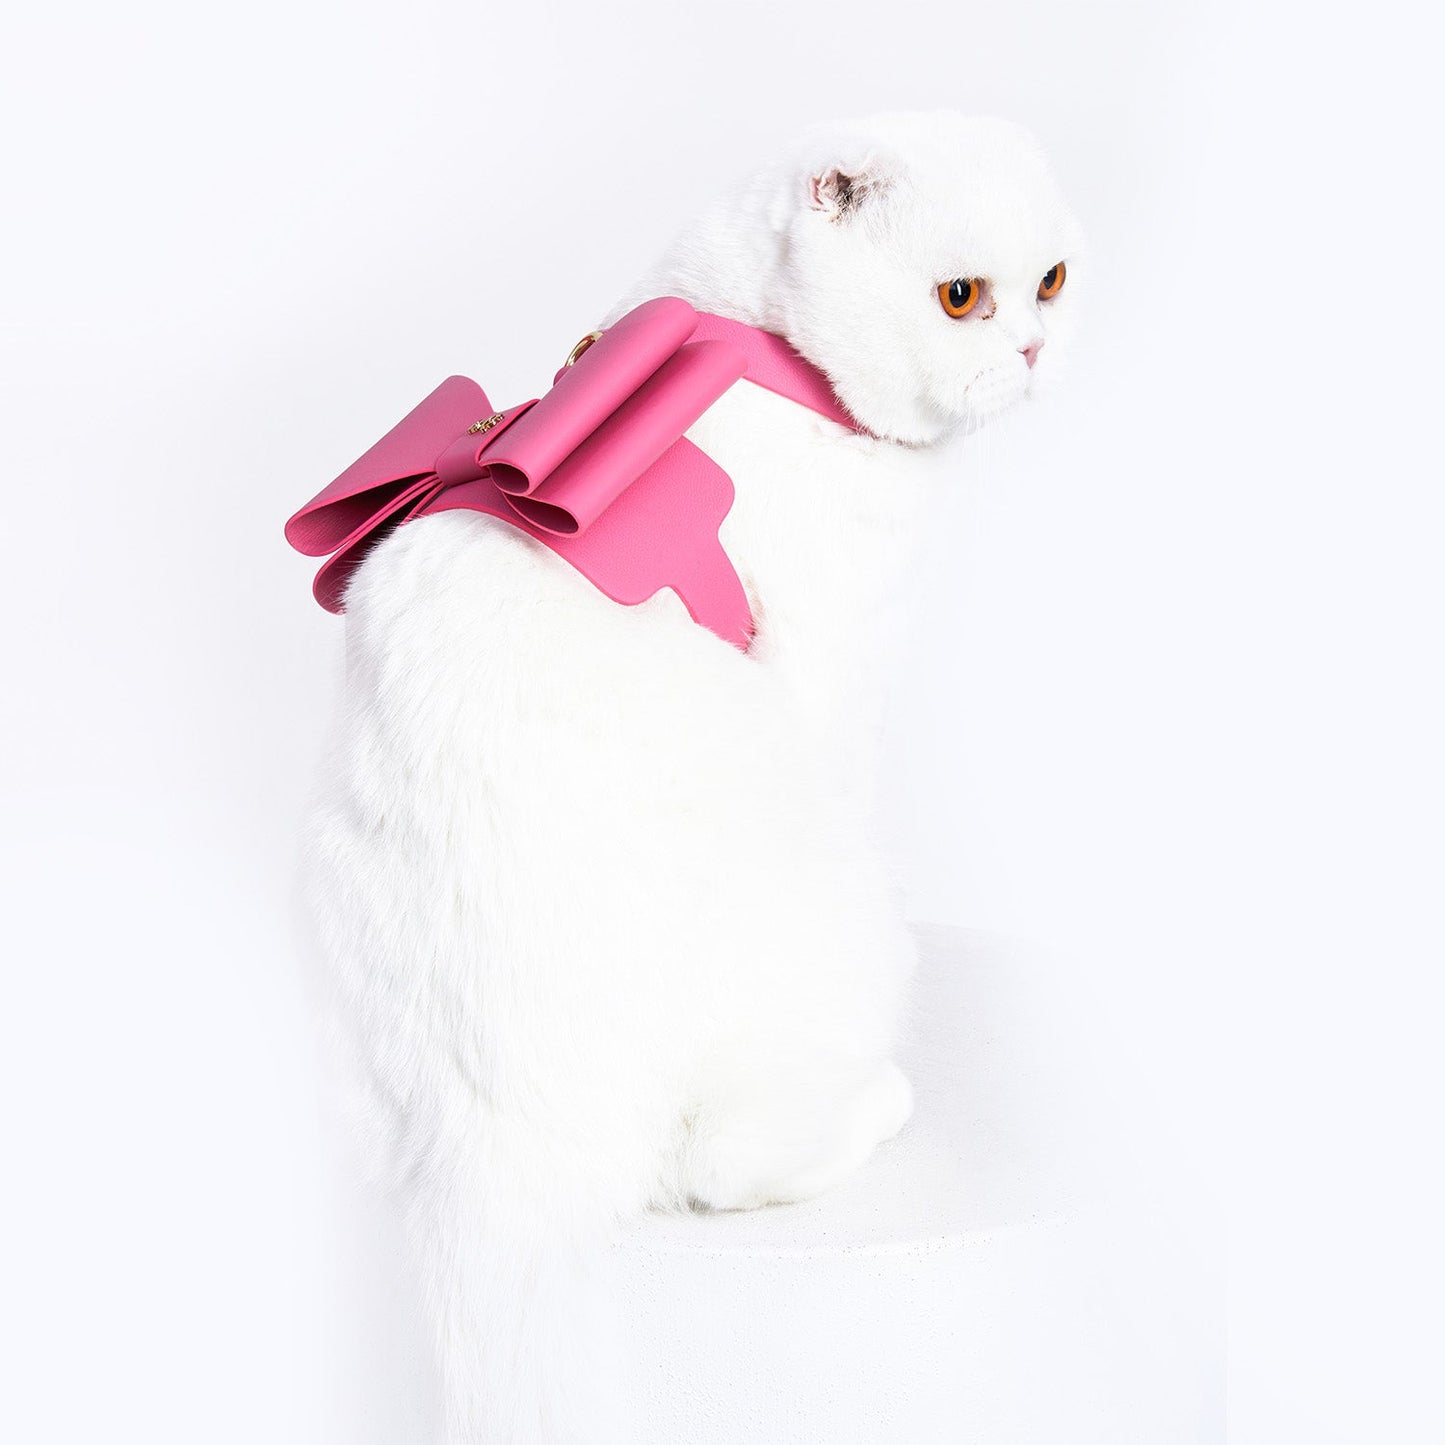 Metapink Bow Cat Harness by Moshiqa